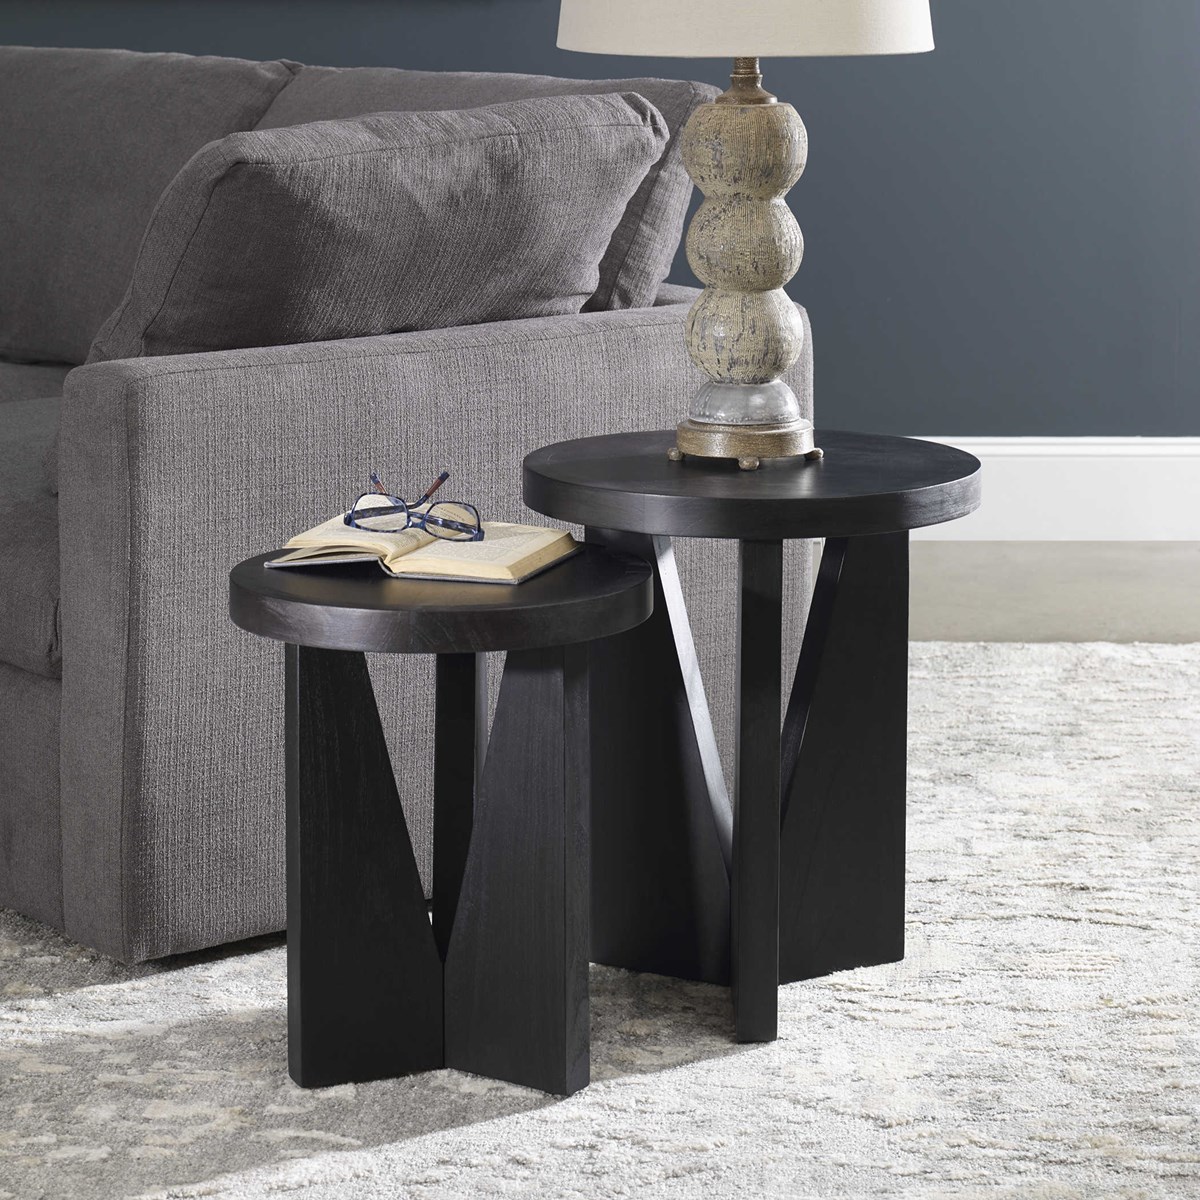 Picture of 212 Main 25467 21.75 x 20.5 x 12.75 in. Nadette Nesting Tables  Set of 2